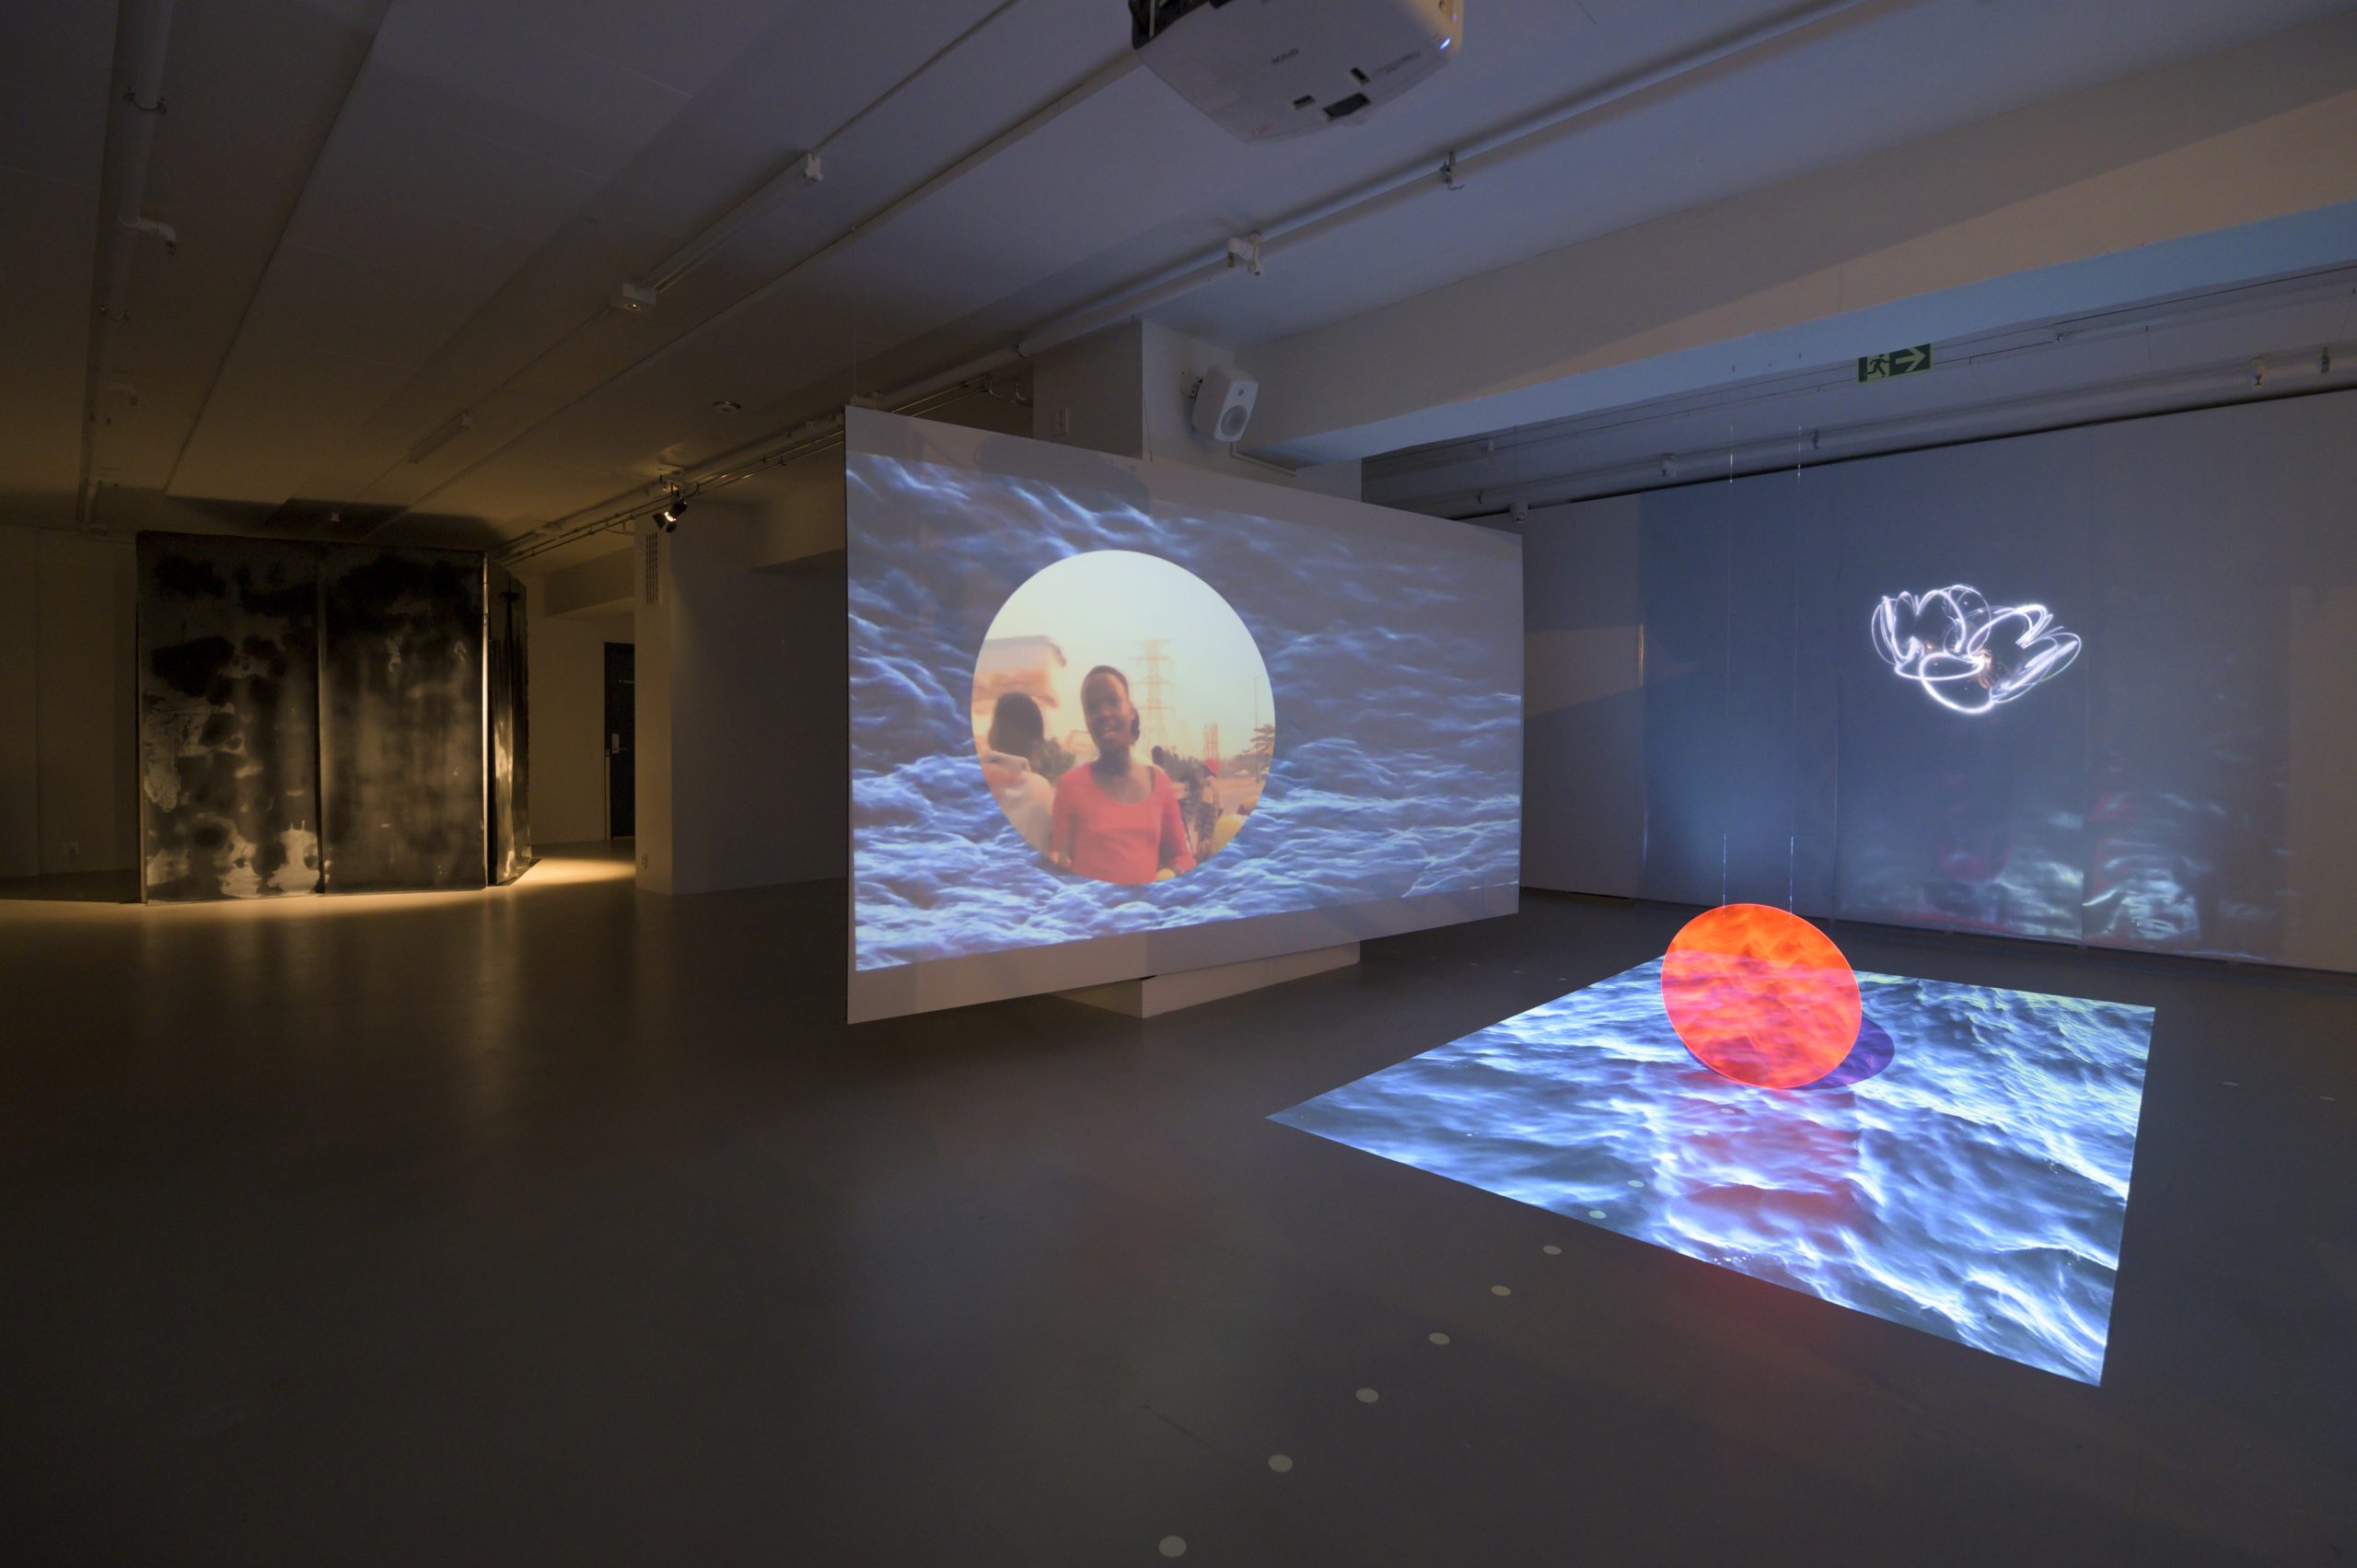 Installation view of the group exhibition Sex Ecologies at Kunsthall Trondheim, Norway. The image shows works by artists Ibrahim Fazlic and Okwui Okpokwasili with Peter Born. Commissioned by Kunsthall Trondheim and The Seed Box. Photo: Daniel Vincent Hansen.